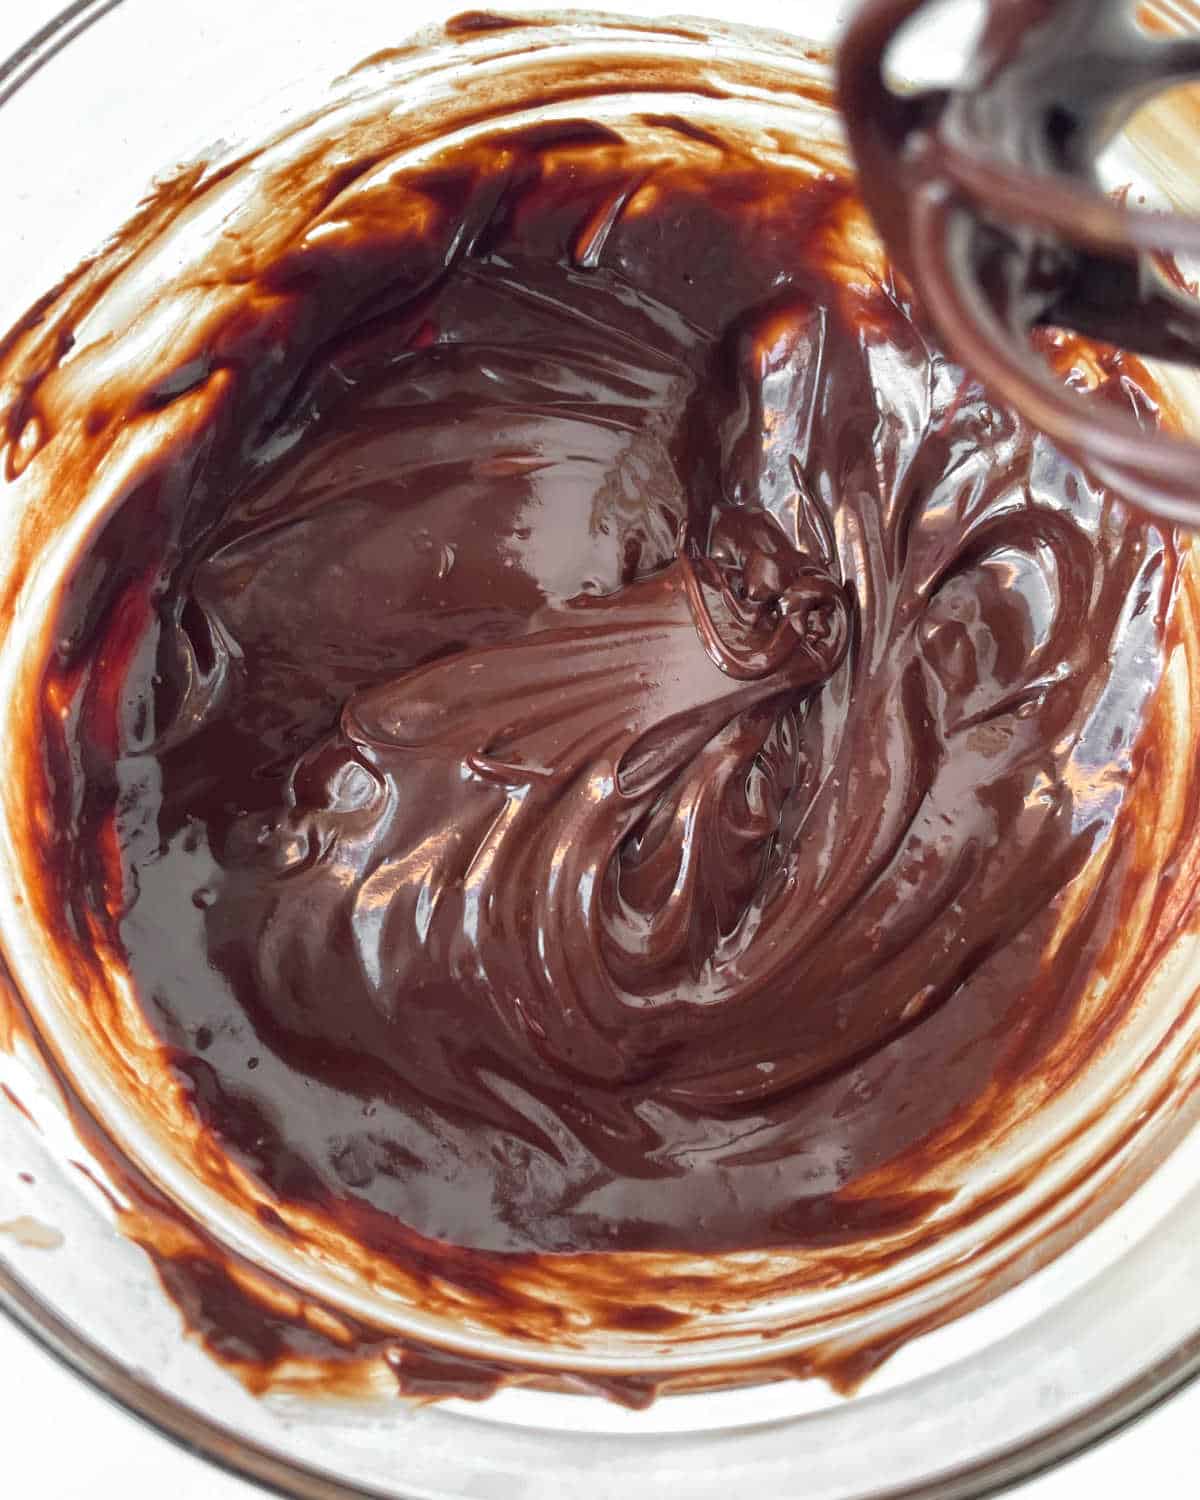 Close up of chocolate ganache coating in a glass bowl.